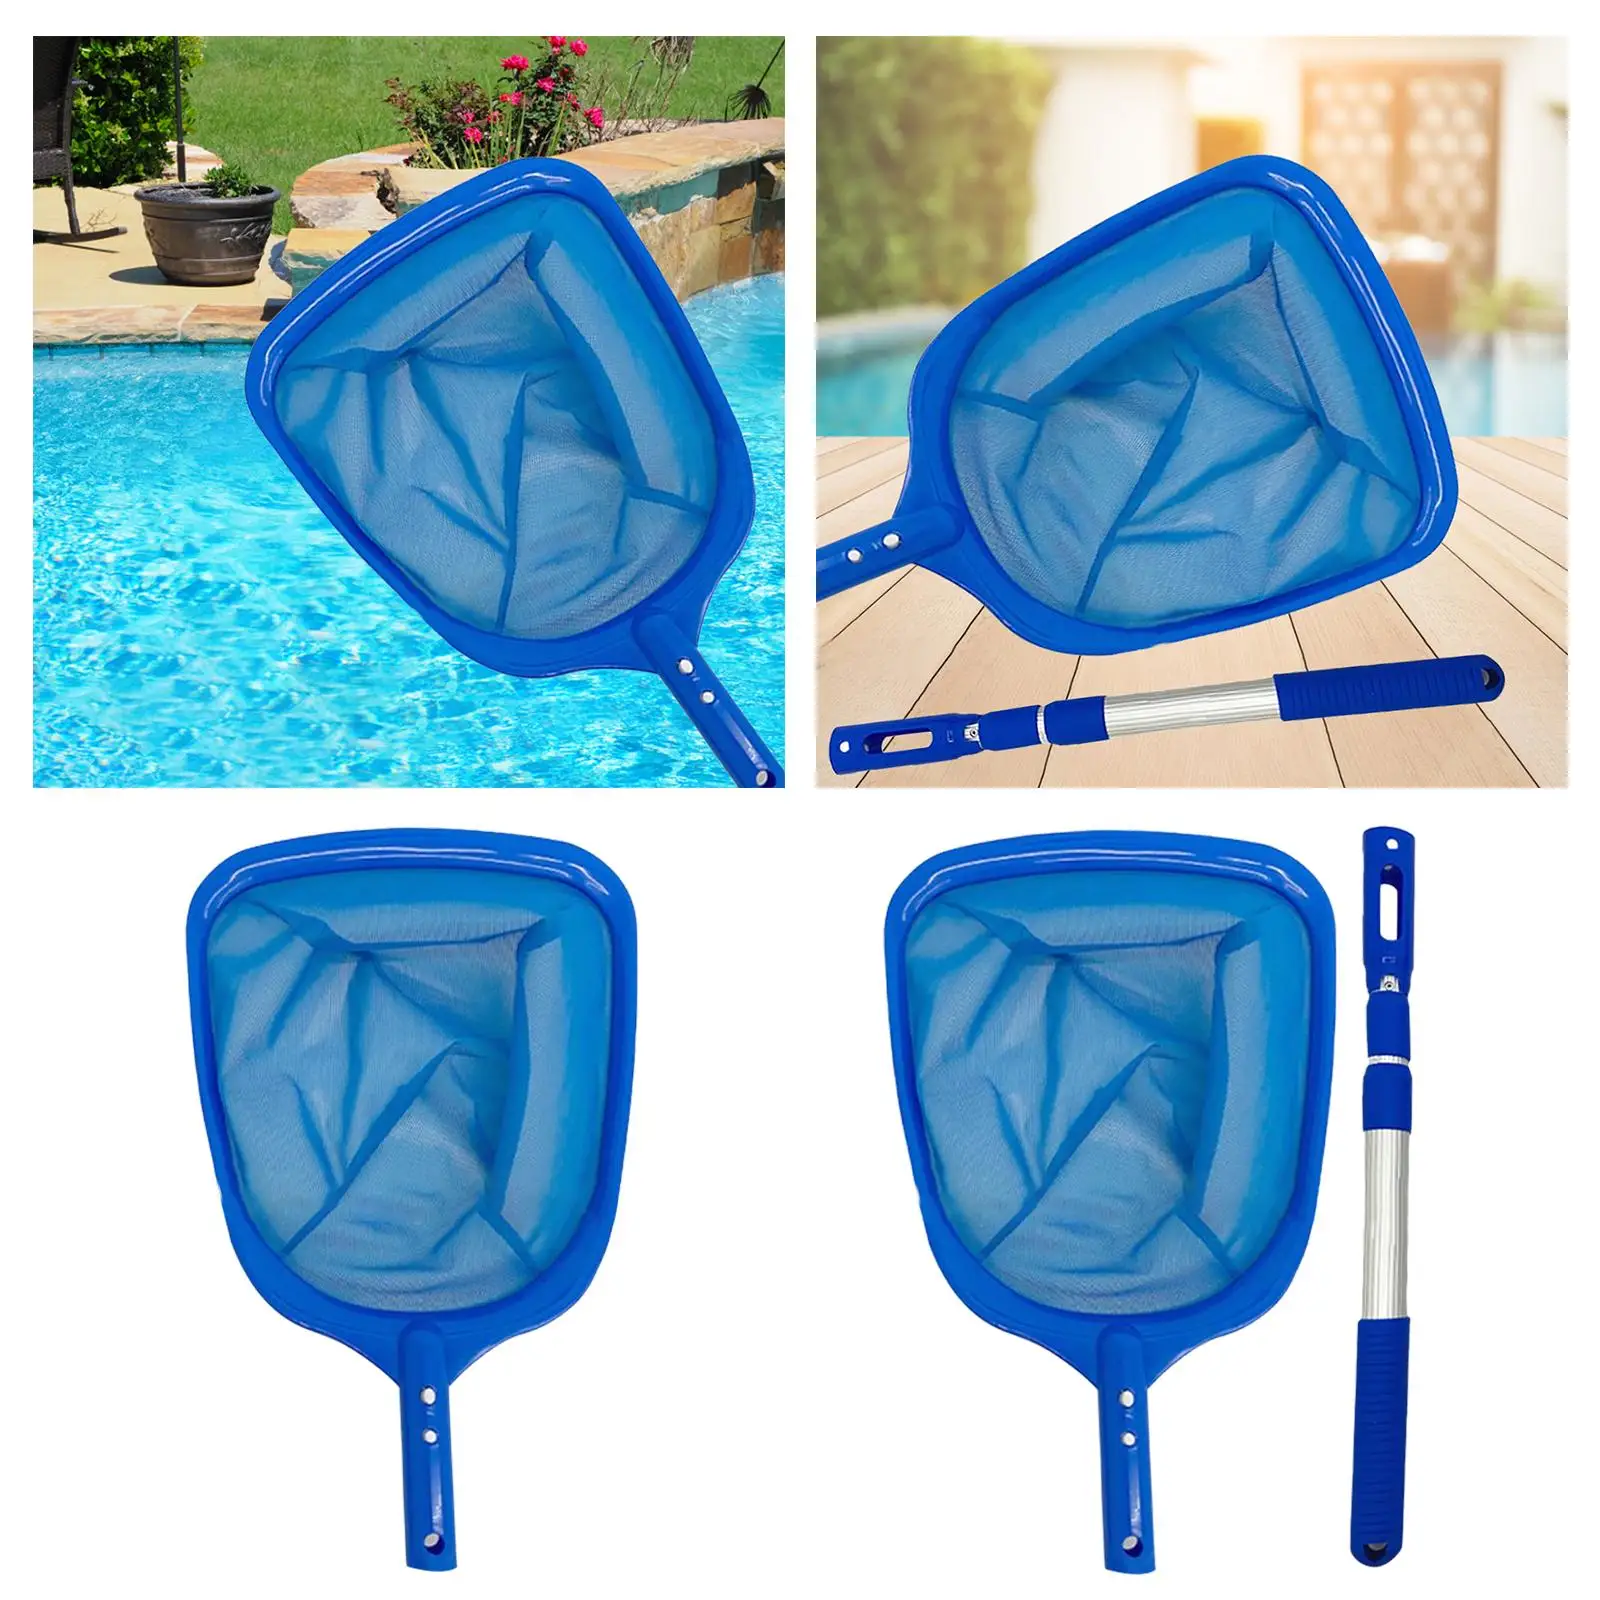 Swimming Pool Cleaner Accessories Adjustable Pole for Spas Fountains above or In-Ground Pools Hot Tub Removing Leaves & Debris